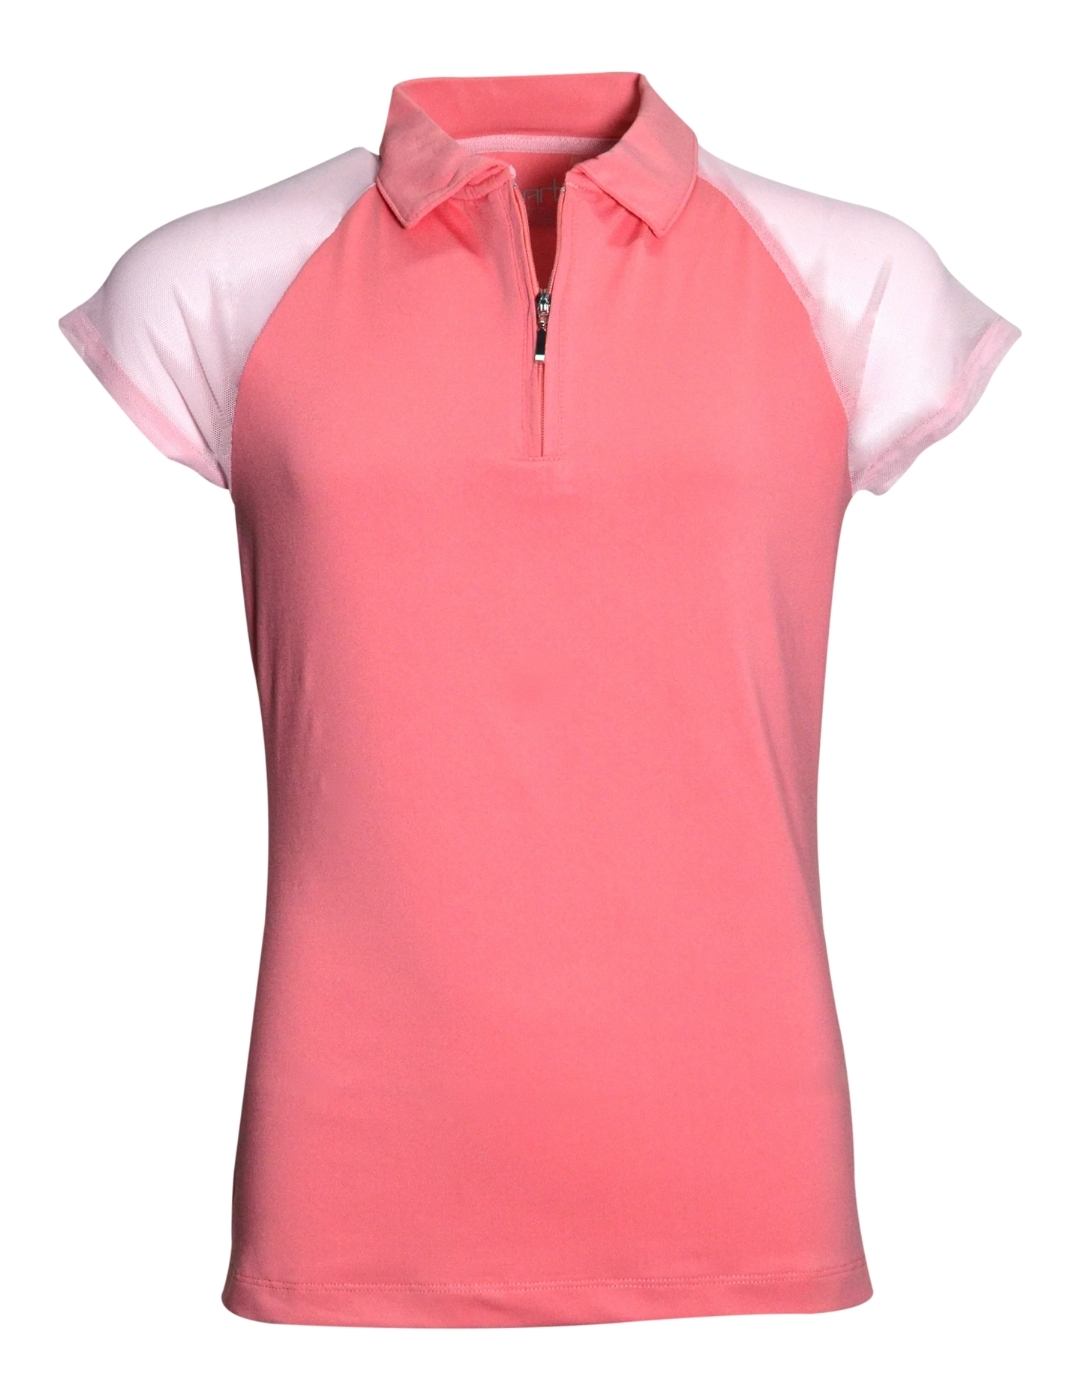 Pia Youth Girls' Polo